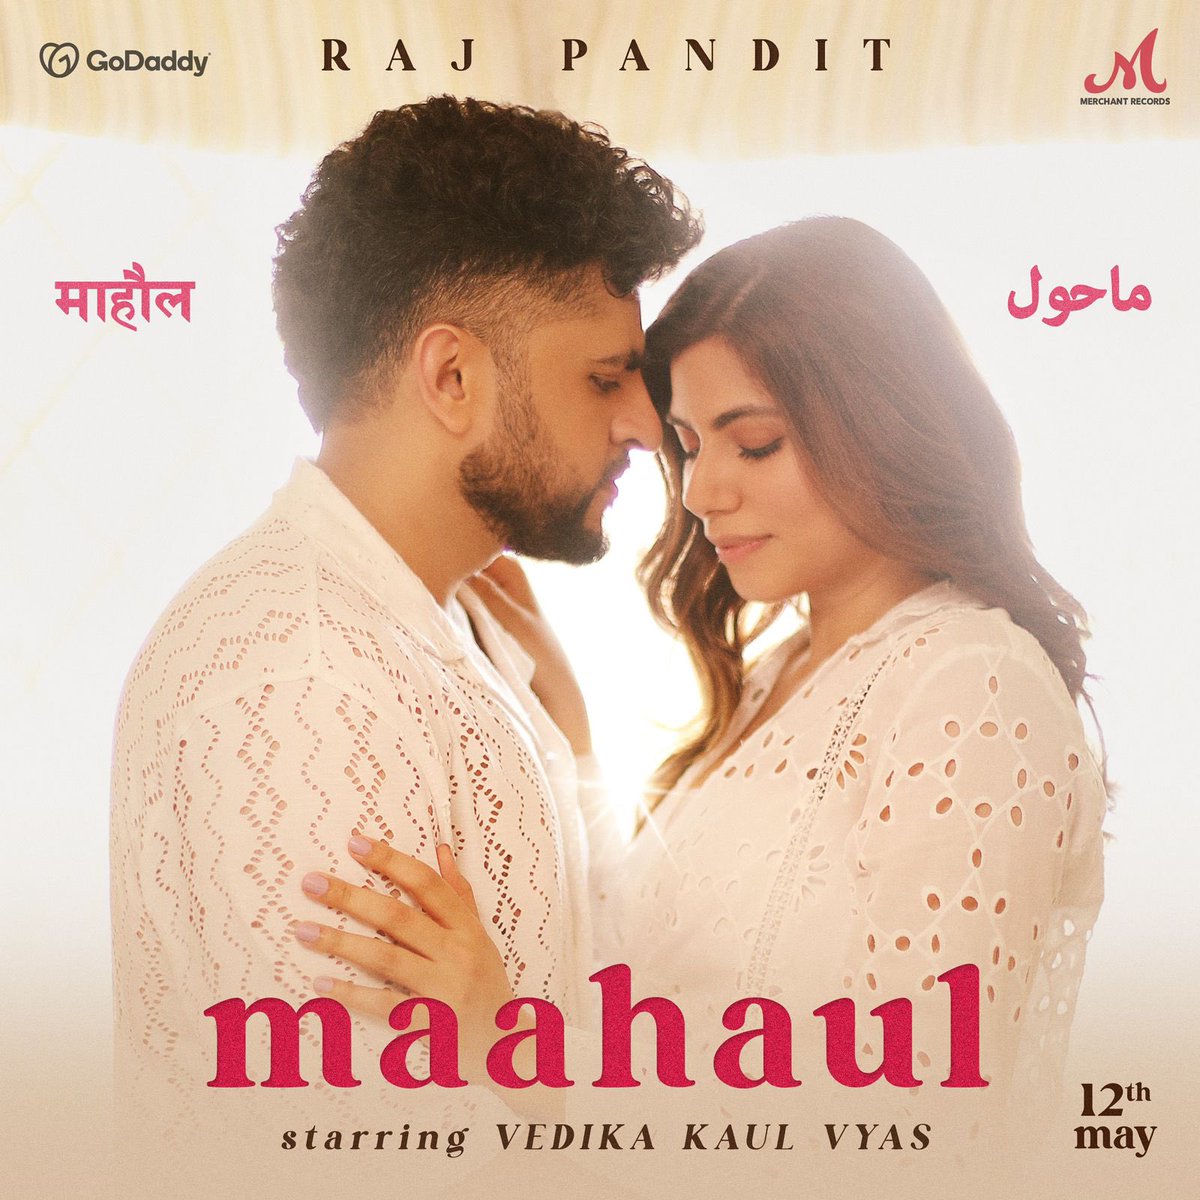 ROHIT SHETTY LAUNCHES RAJ PANDIT’S NEW SINGLE… Singer-composer #RajPandit’s new single #Maahaul was launched by #RohitShetty at an event in #Mumbai.#SalimSulaiman also graced the occasion.